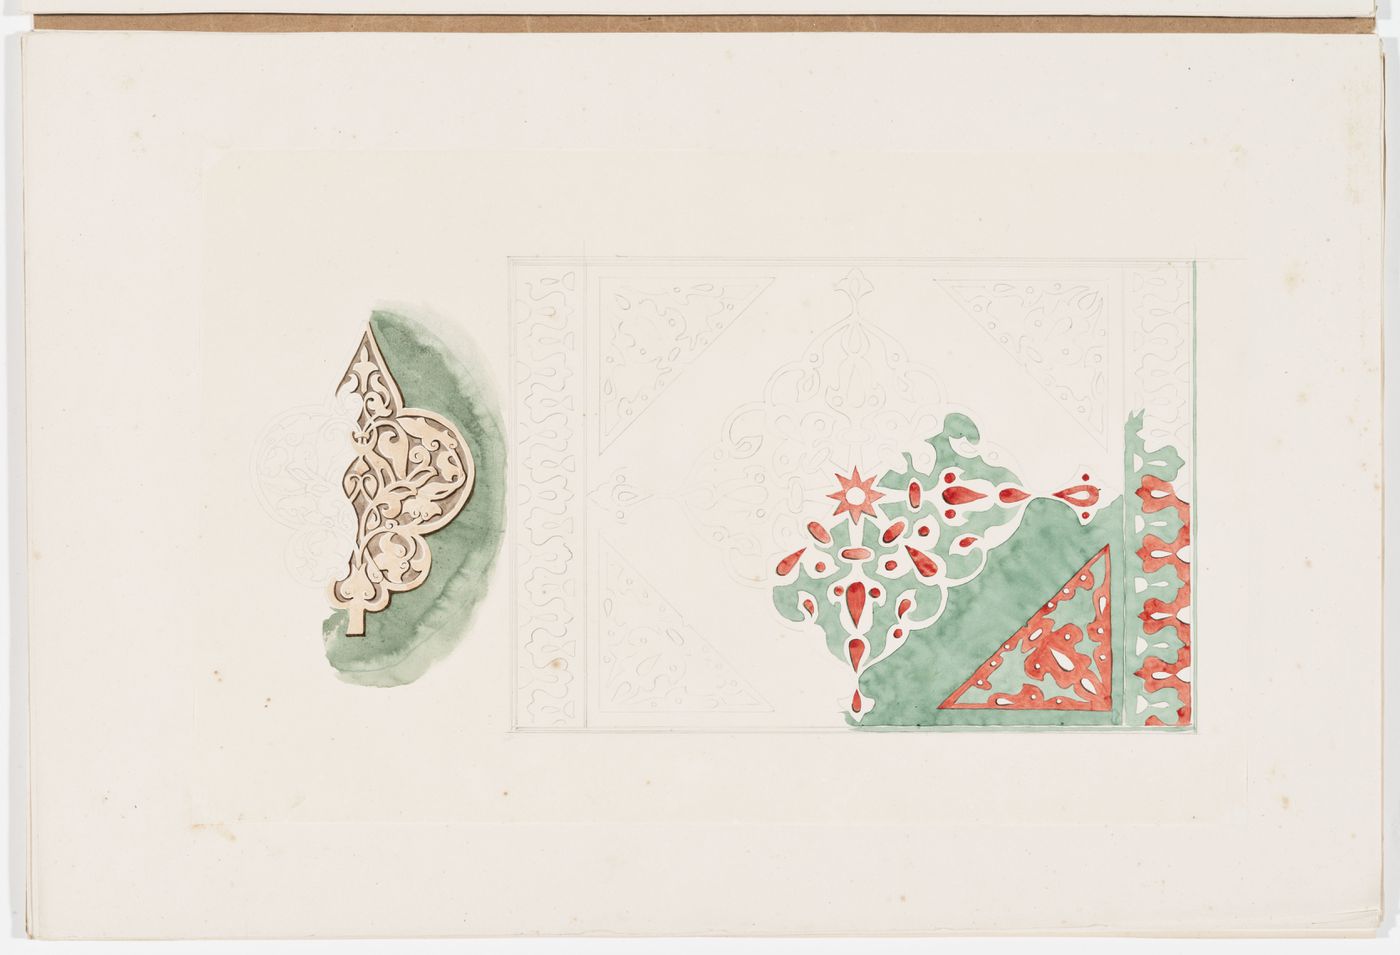 Ornament drawing of a panel decorated with foliage, probably Islamic, and a leaf-shaped panel